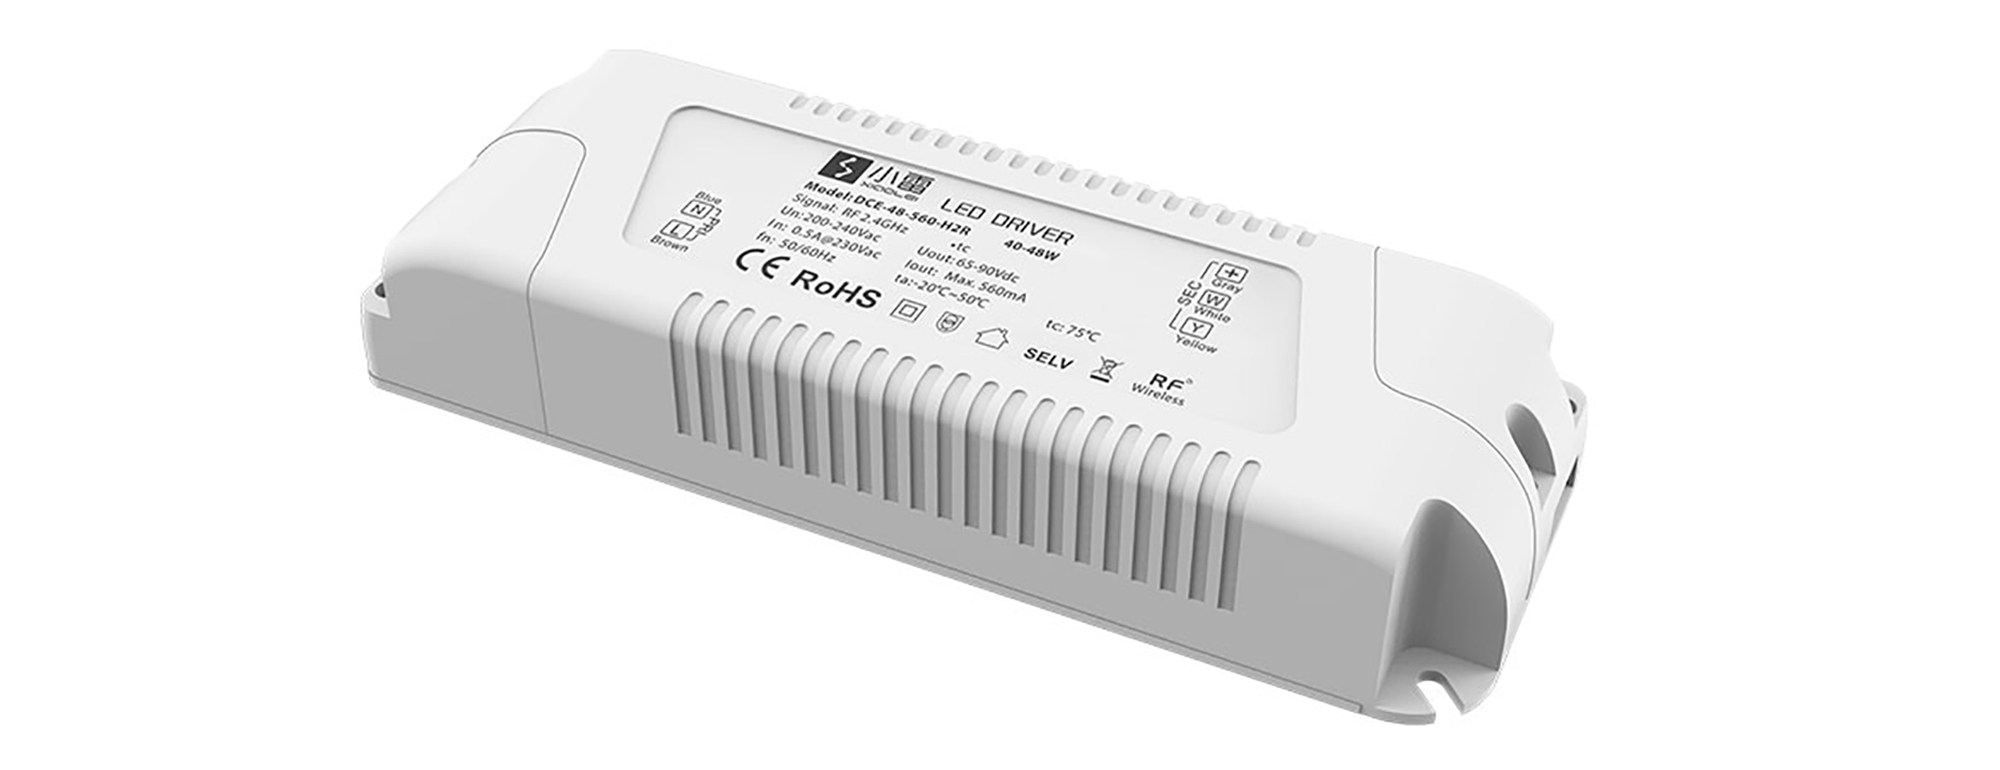 DCE-48-560-H2R  Ltech Smart home Wireless Dimmablre LED Driver 48W 60-90Vdc /560mA.0-100% PWM dimming;Over voltage; over load and Short circuit protection; IP20.